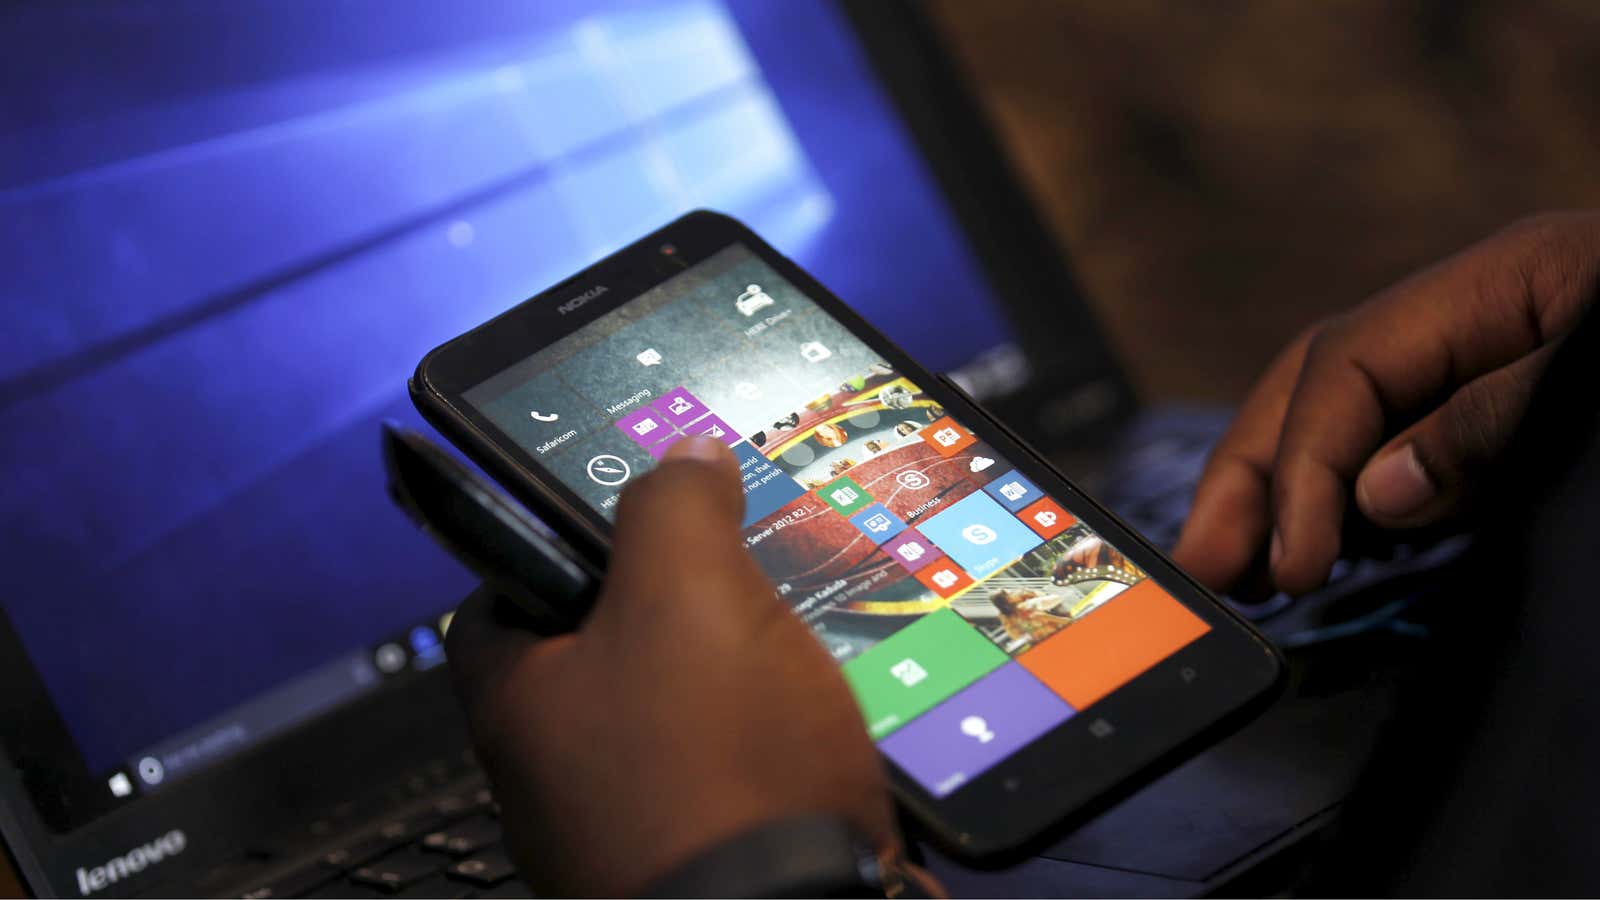 A Microsoft delegate checks applications on a smartphone during the launch of the Windows 10 operating system in Kenya’s capital Nairobi, July 29, 2015